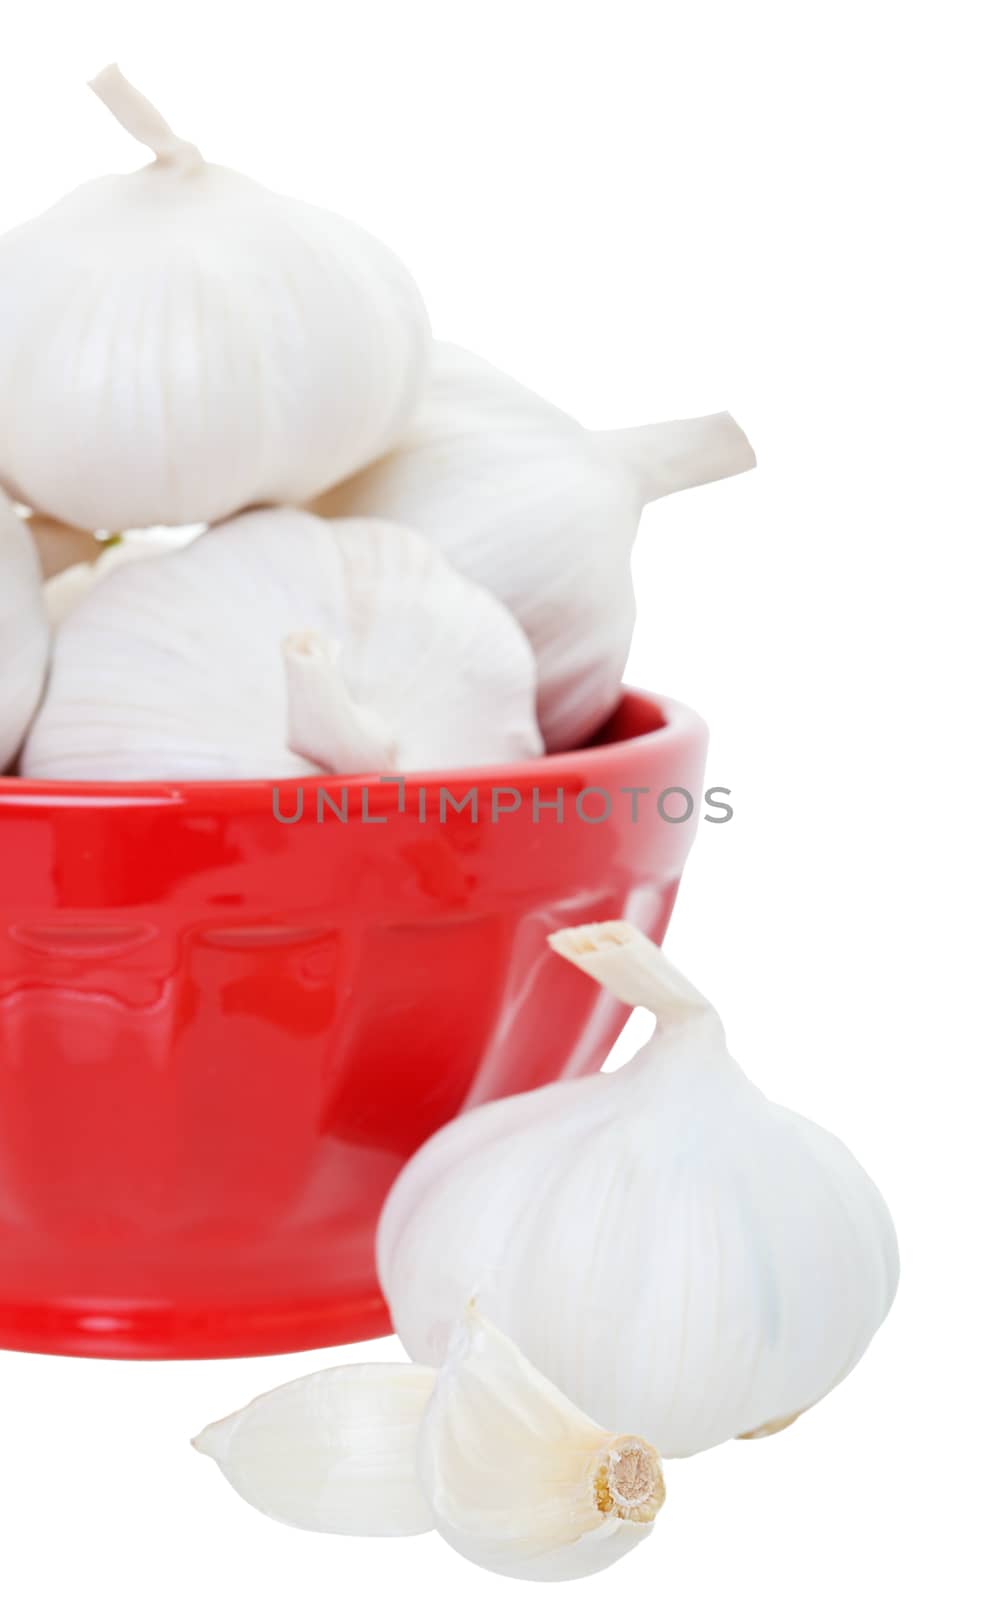 Freshly harvested whole garlic in a red bowl.  Shot on white background.